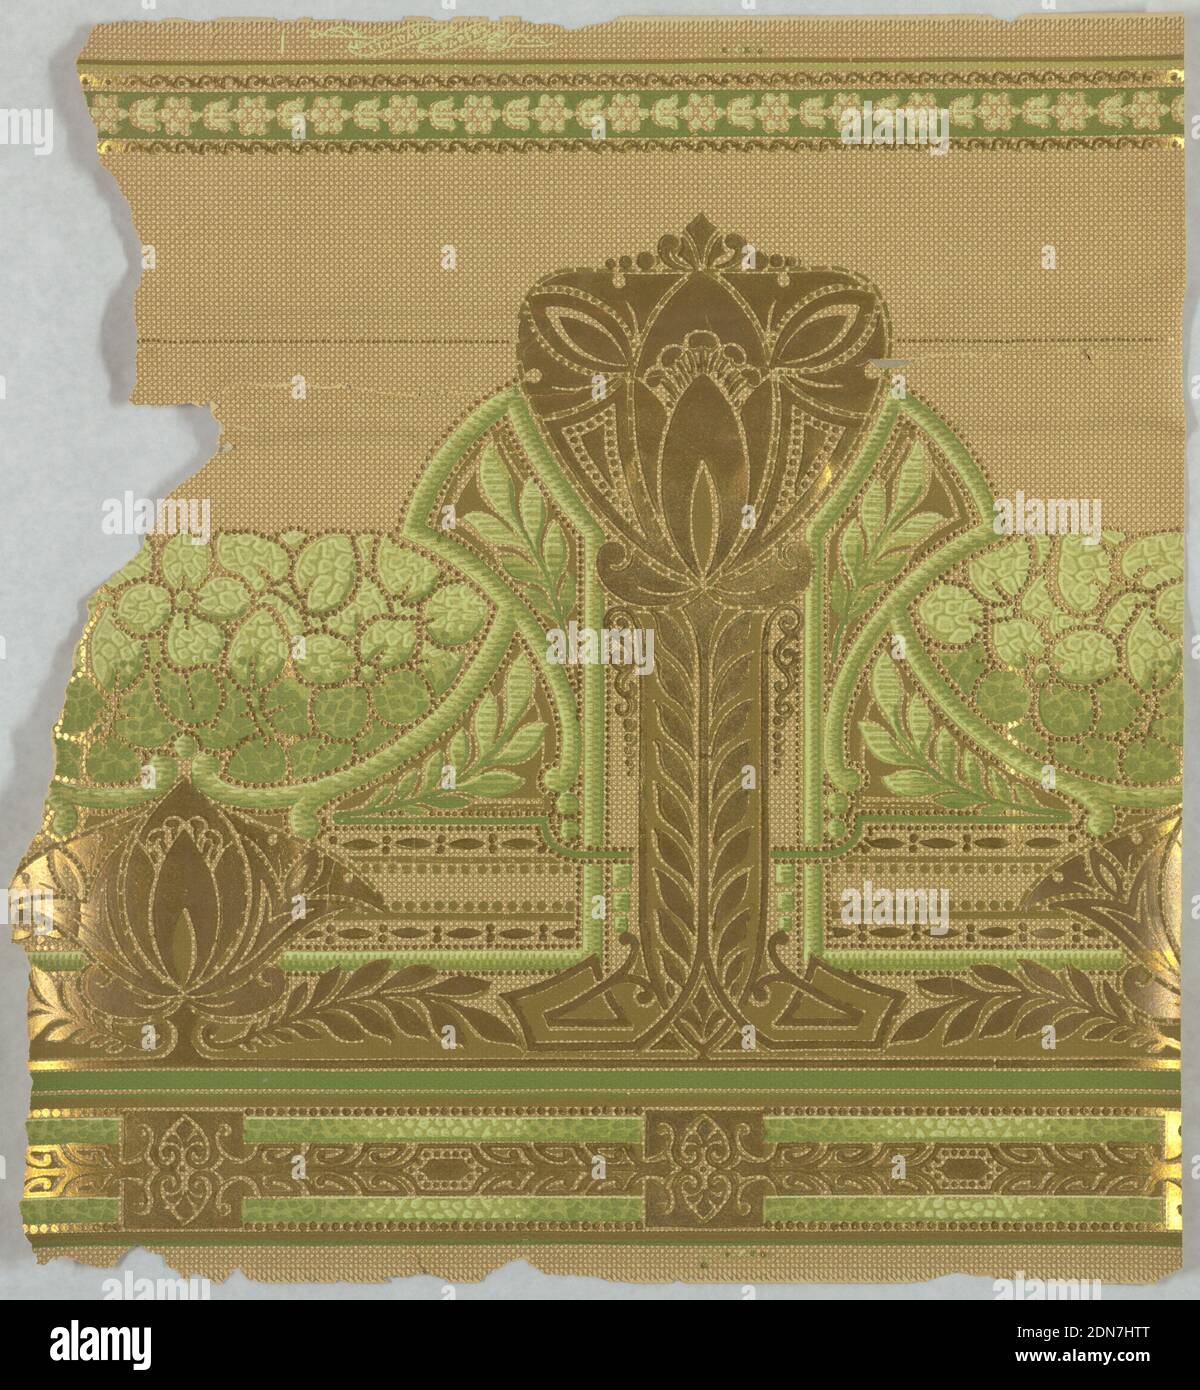 Frieze, Machine-printed, machine made paper, Shaded metallic gold and shades of green over grid of tan lines on ungrounded tan paper, USA, 1890–1910, Wallcoverings, Frieze Stock Photo